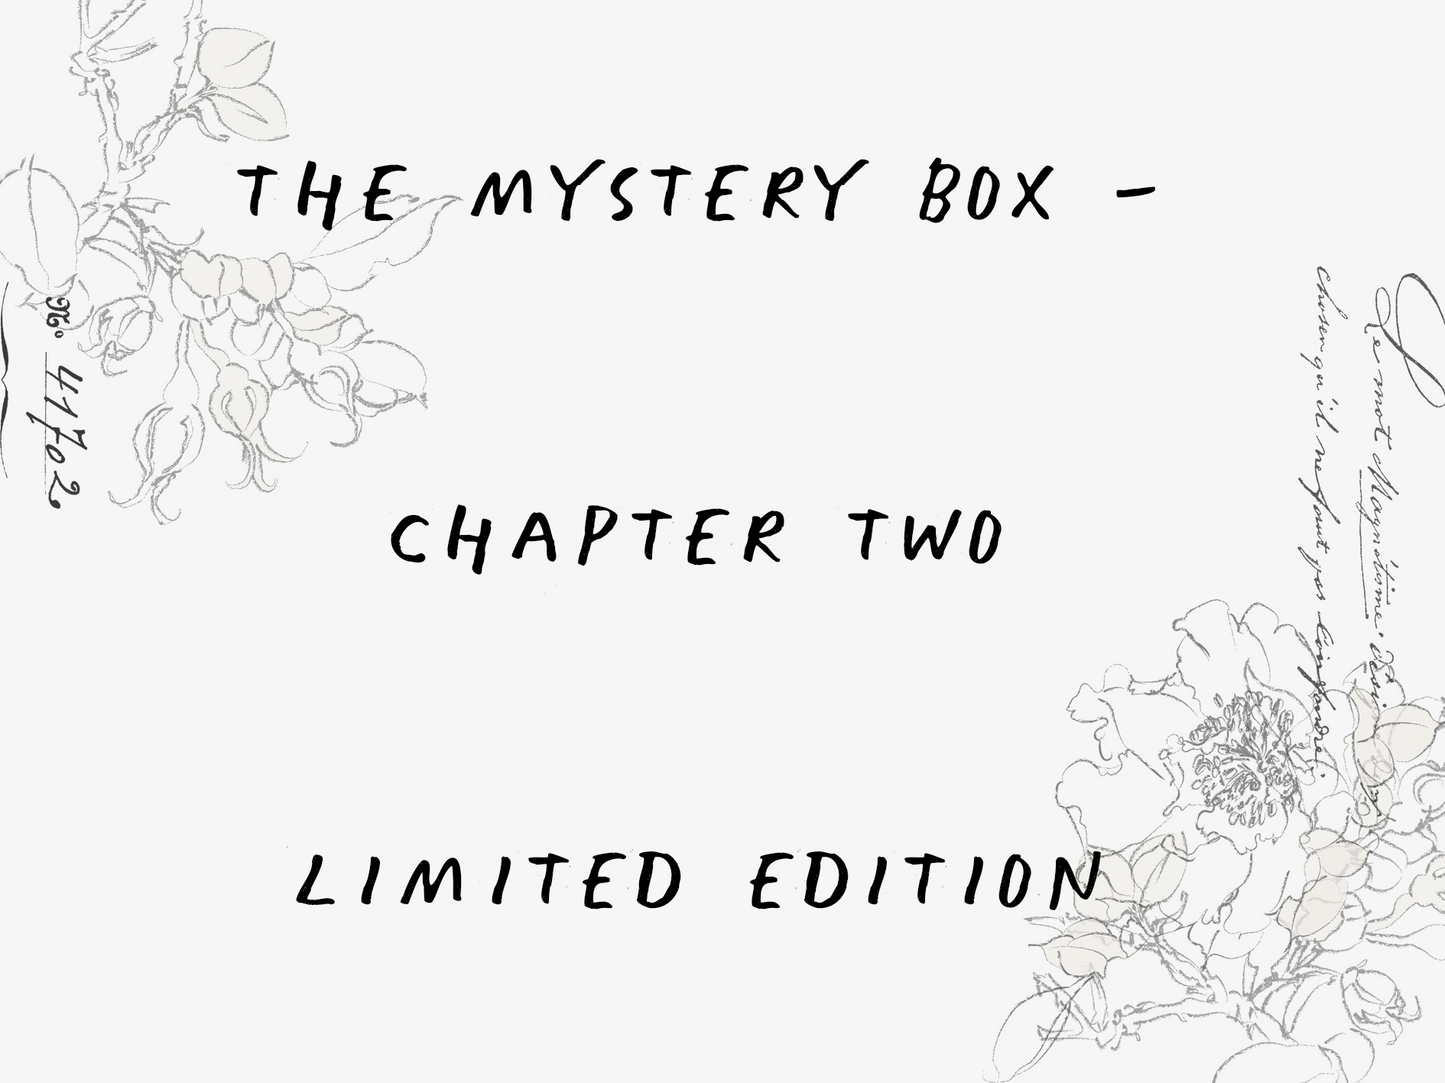 The mystery box - Chapter Two edition